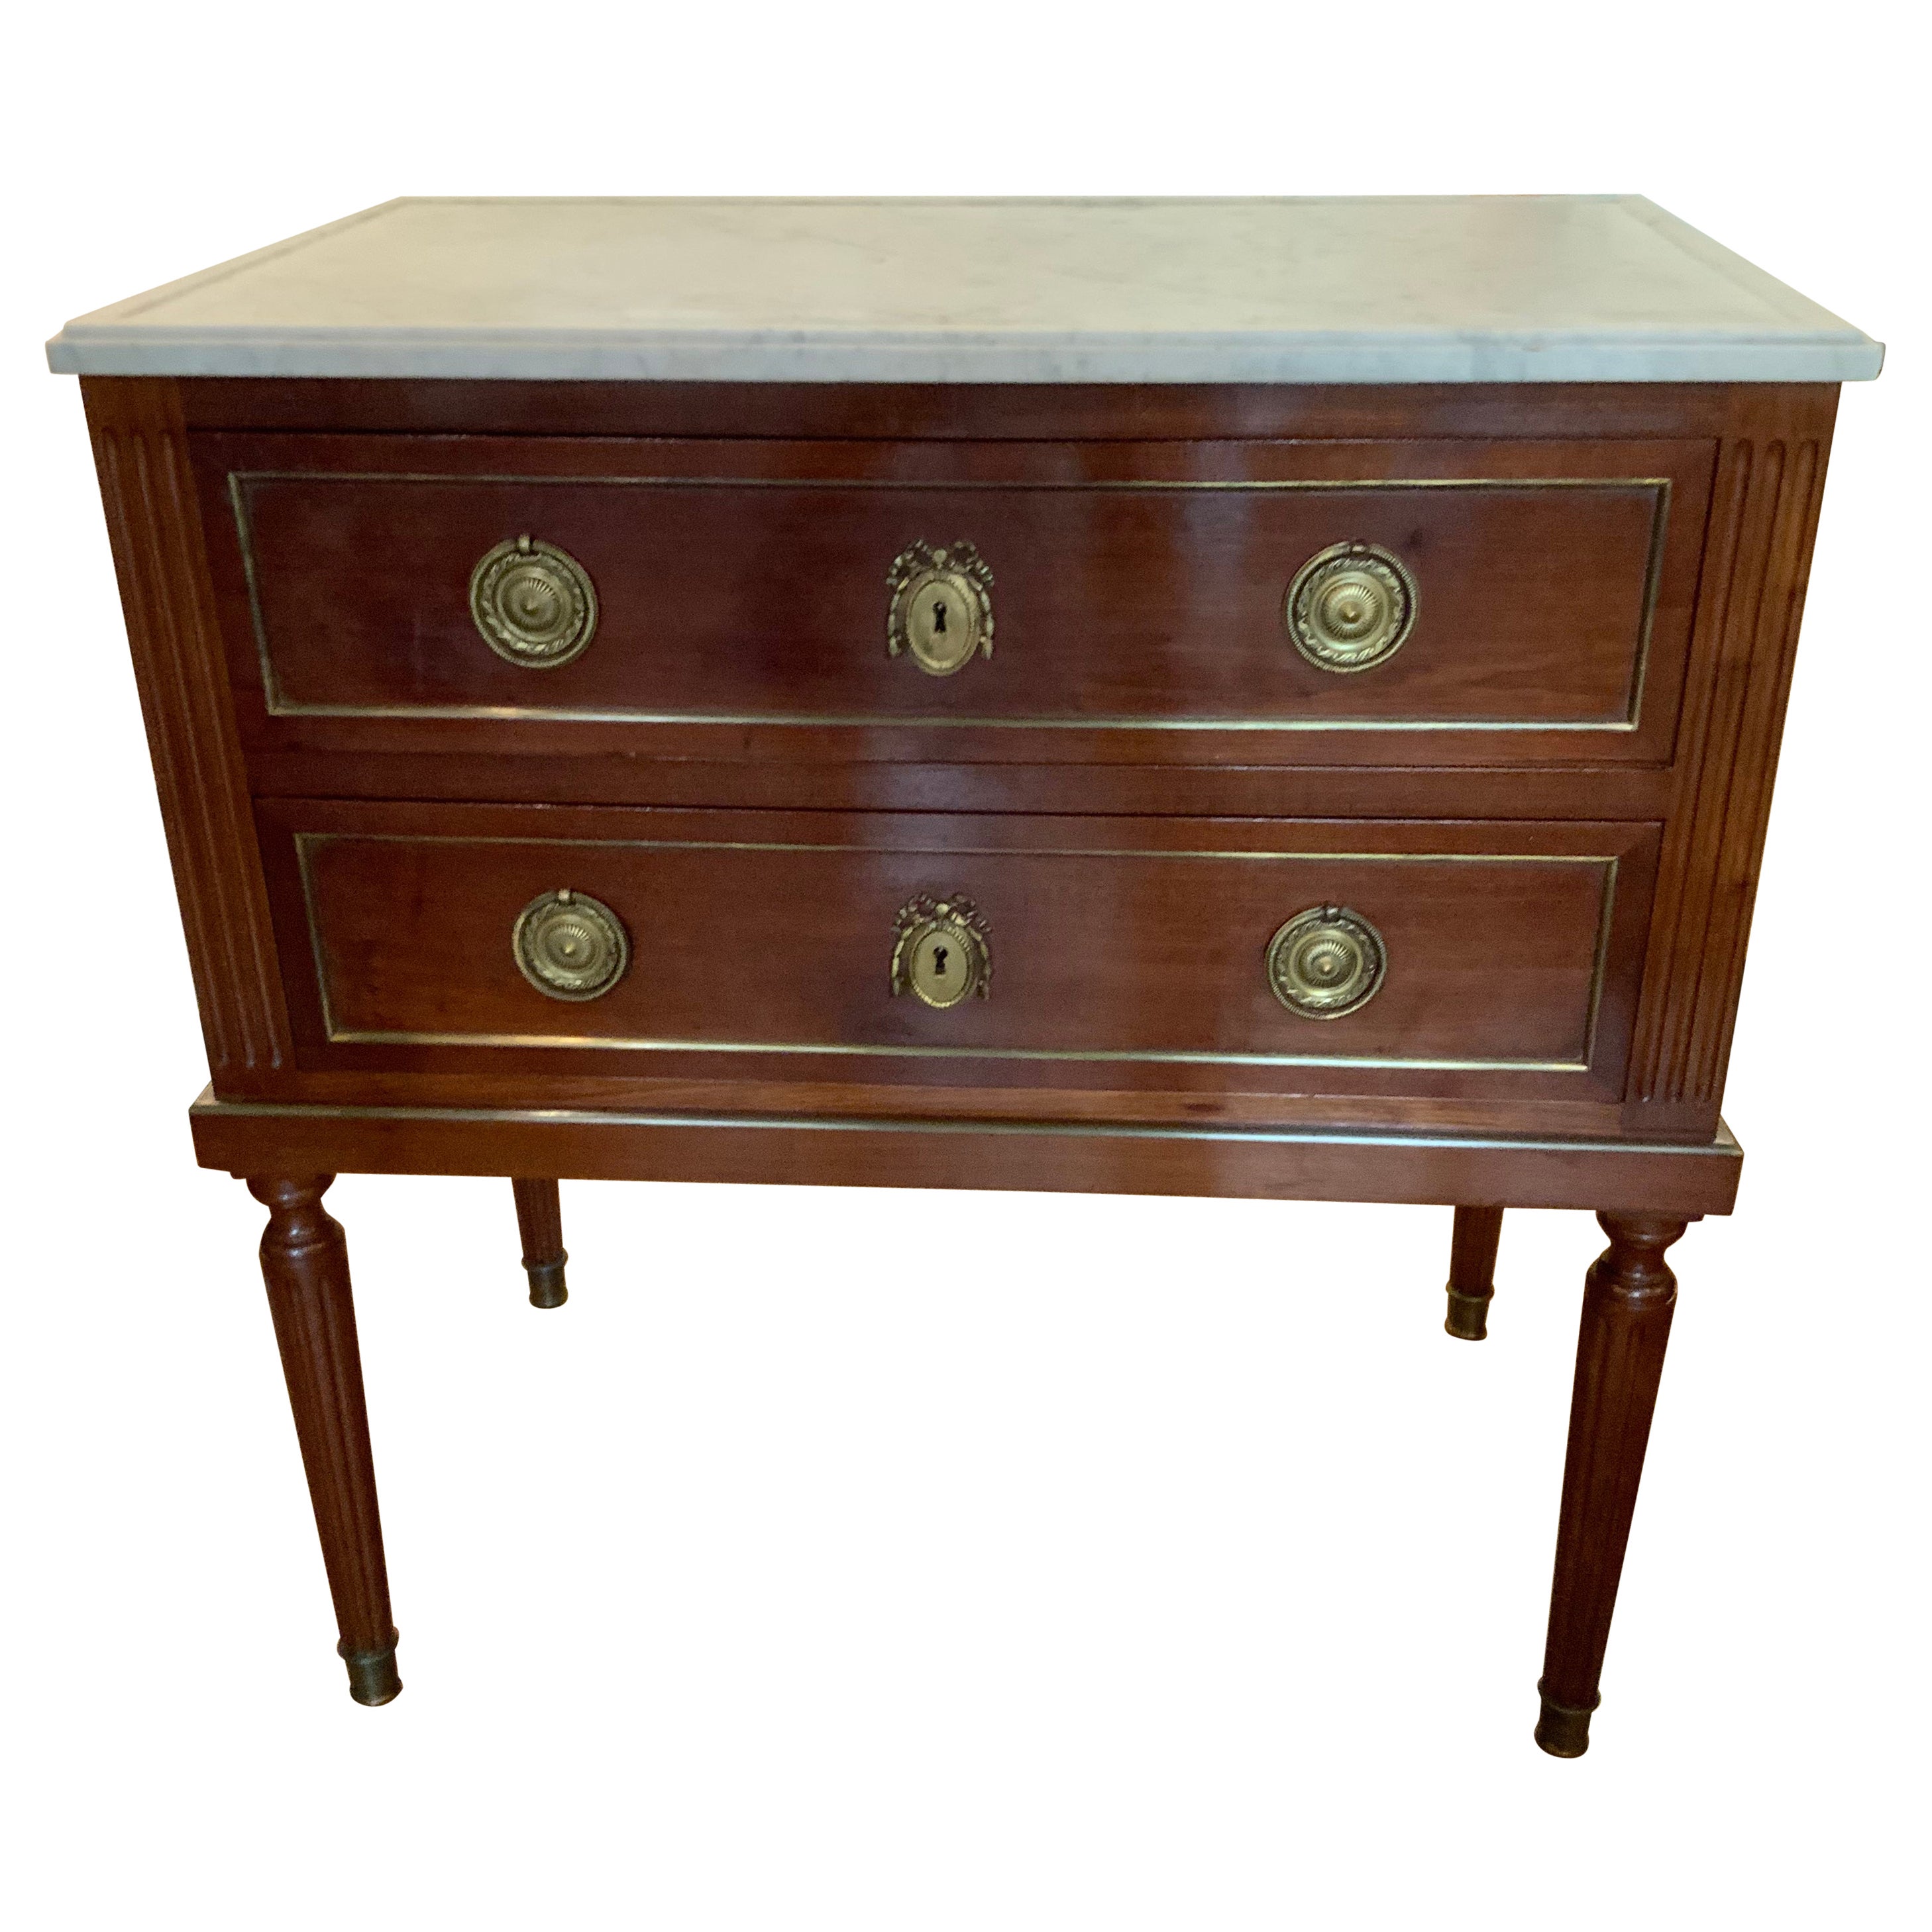 French Louis XVI-Style Mahogany Commode with White Marb, e Top